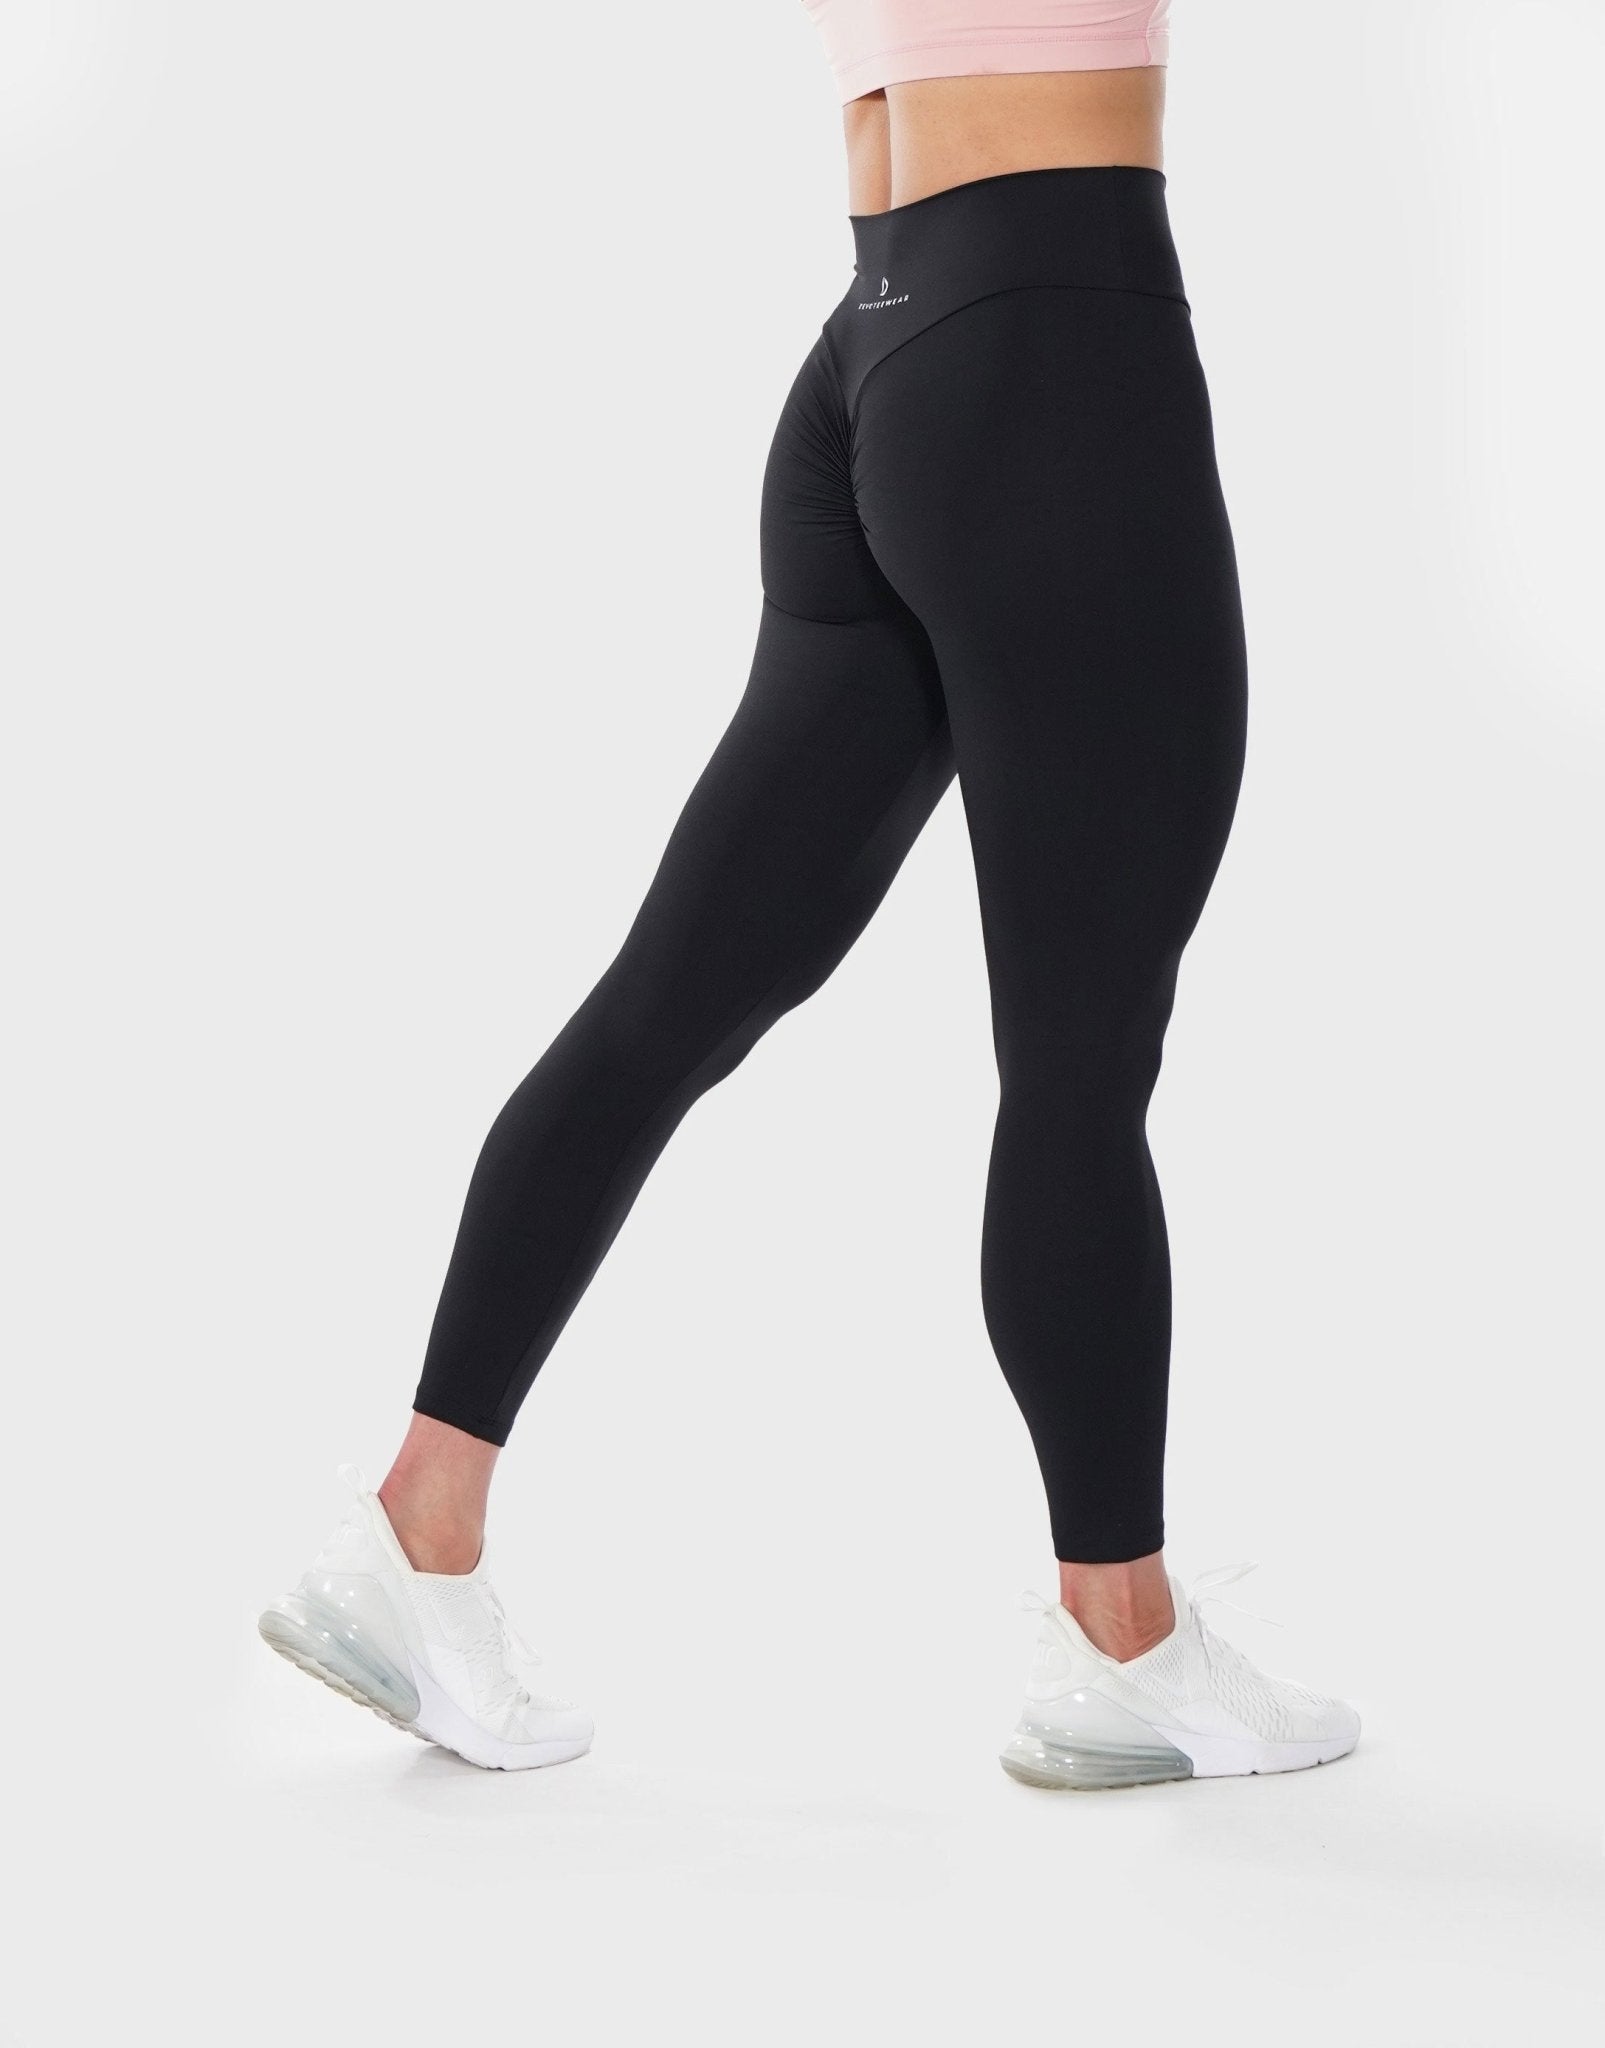 L'URV Leggings SHAKE YOUR BOOTY Leggings Sexy Workout Tights BK